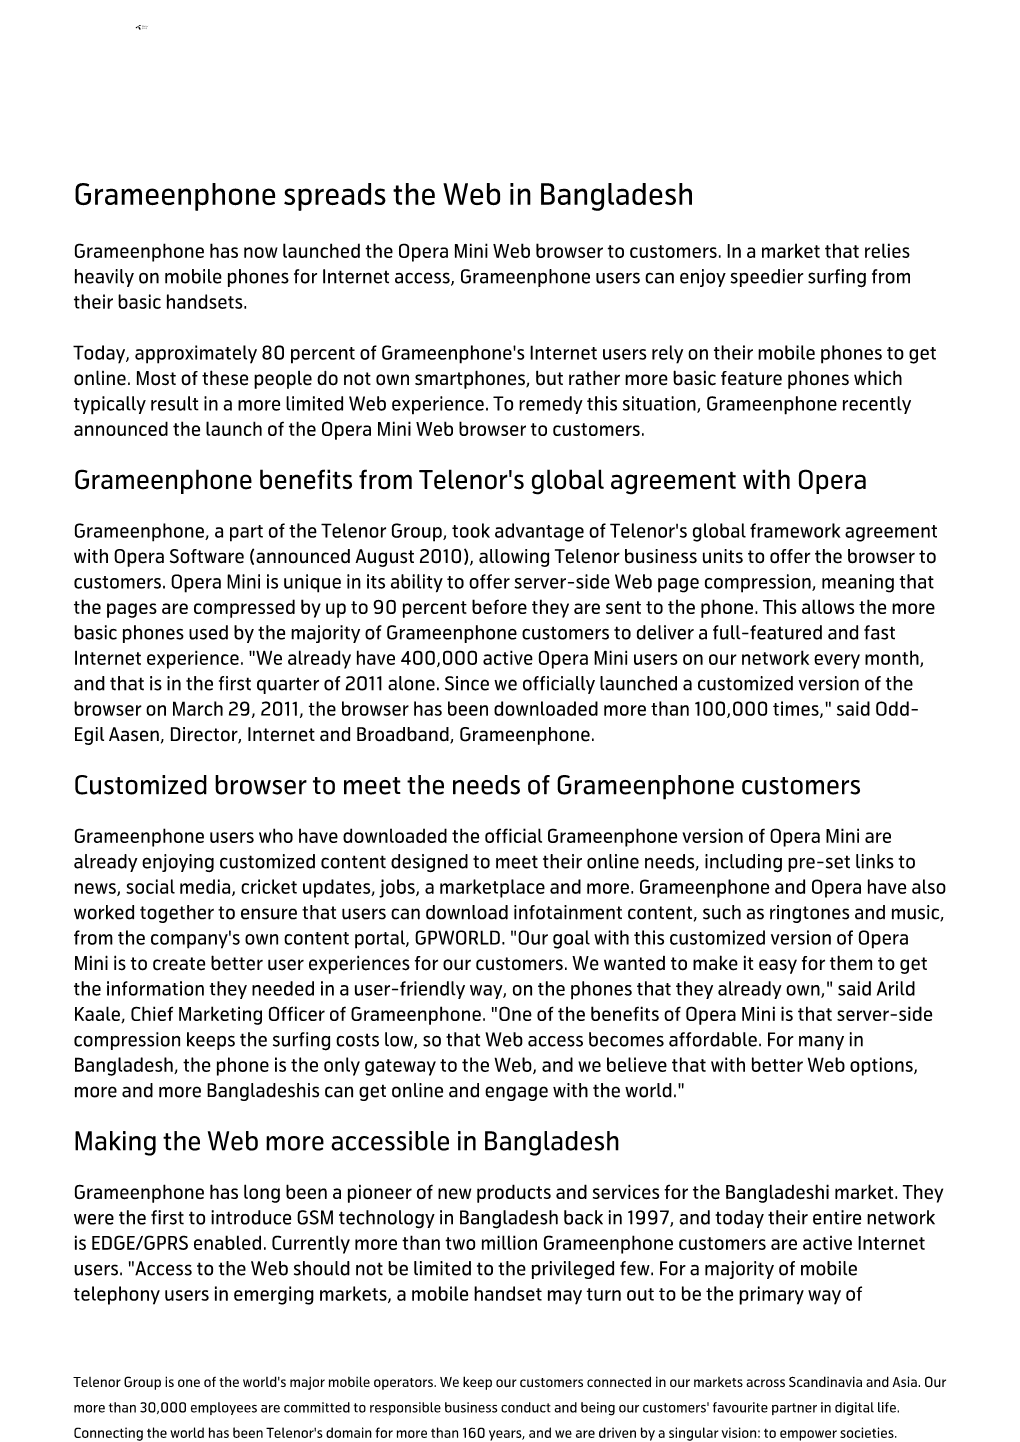 Grameenphone Spreads the Web in Bangladesh